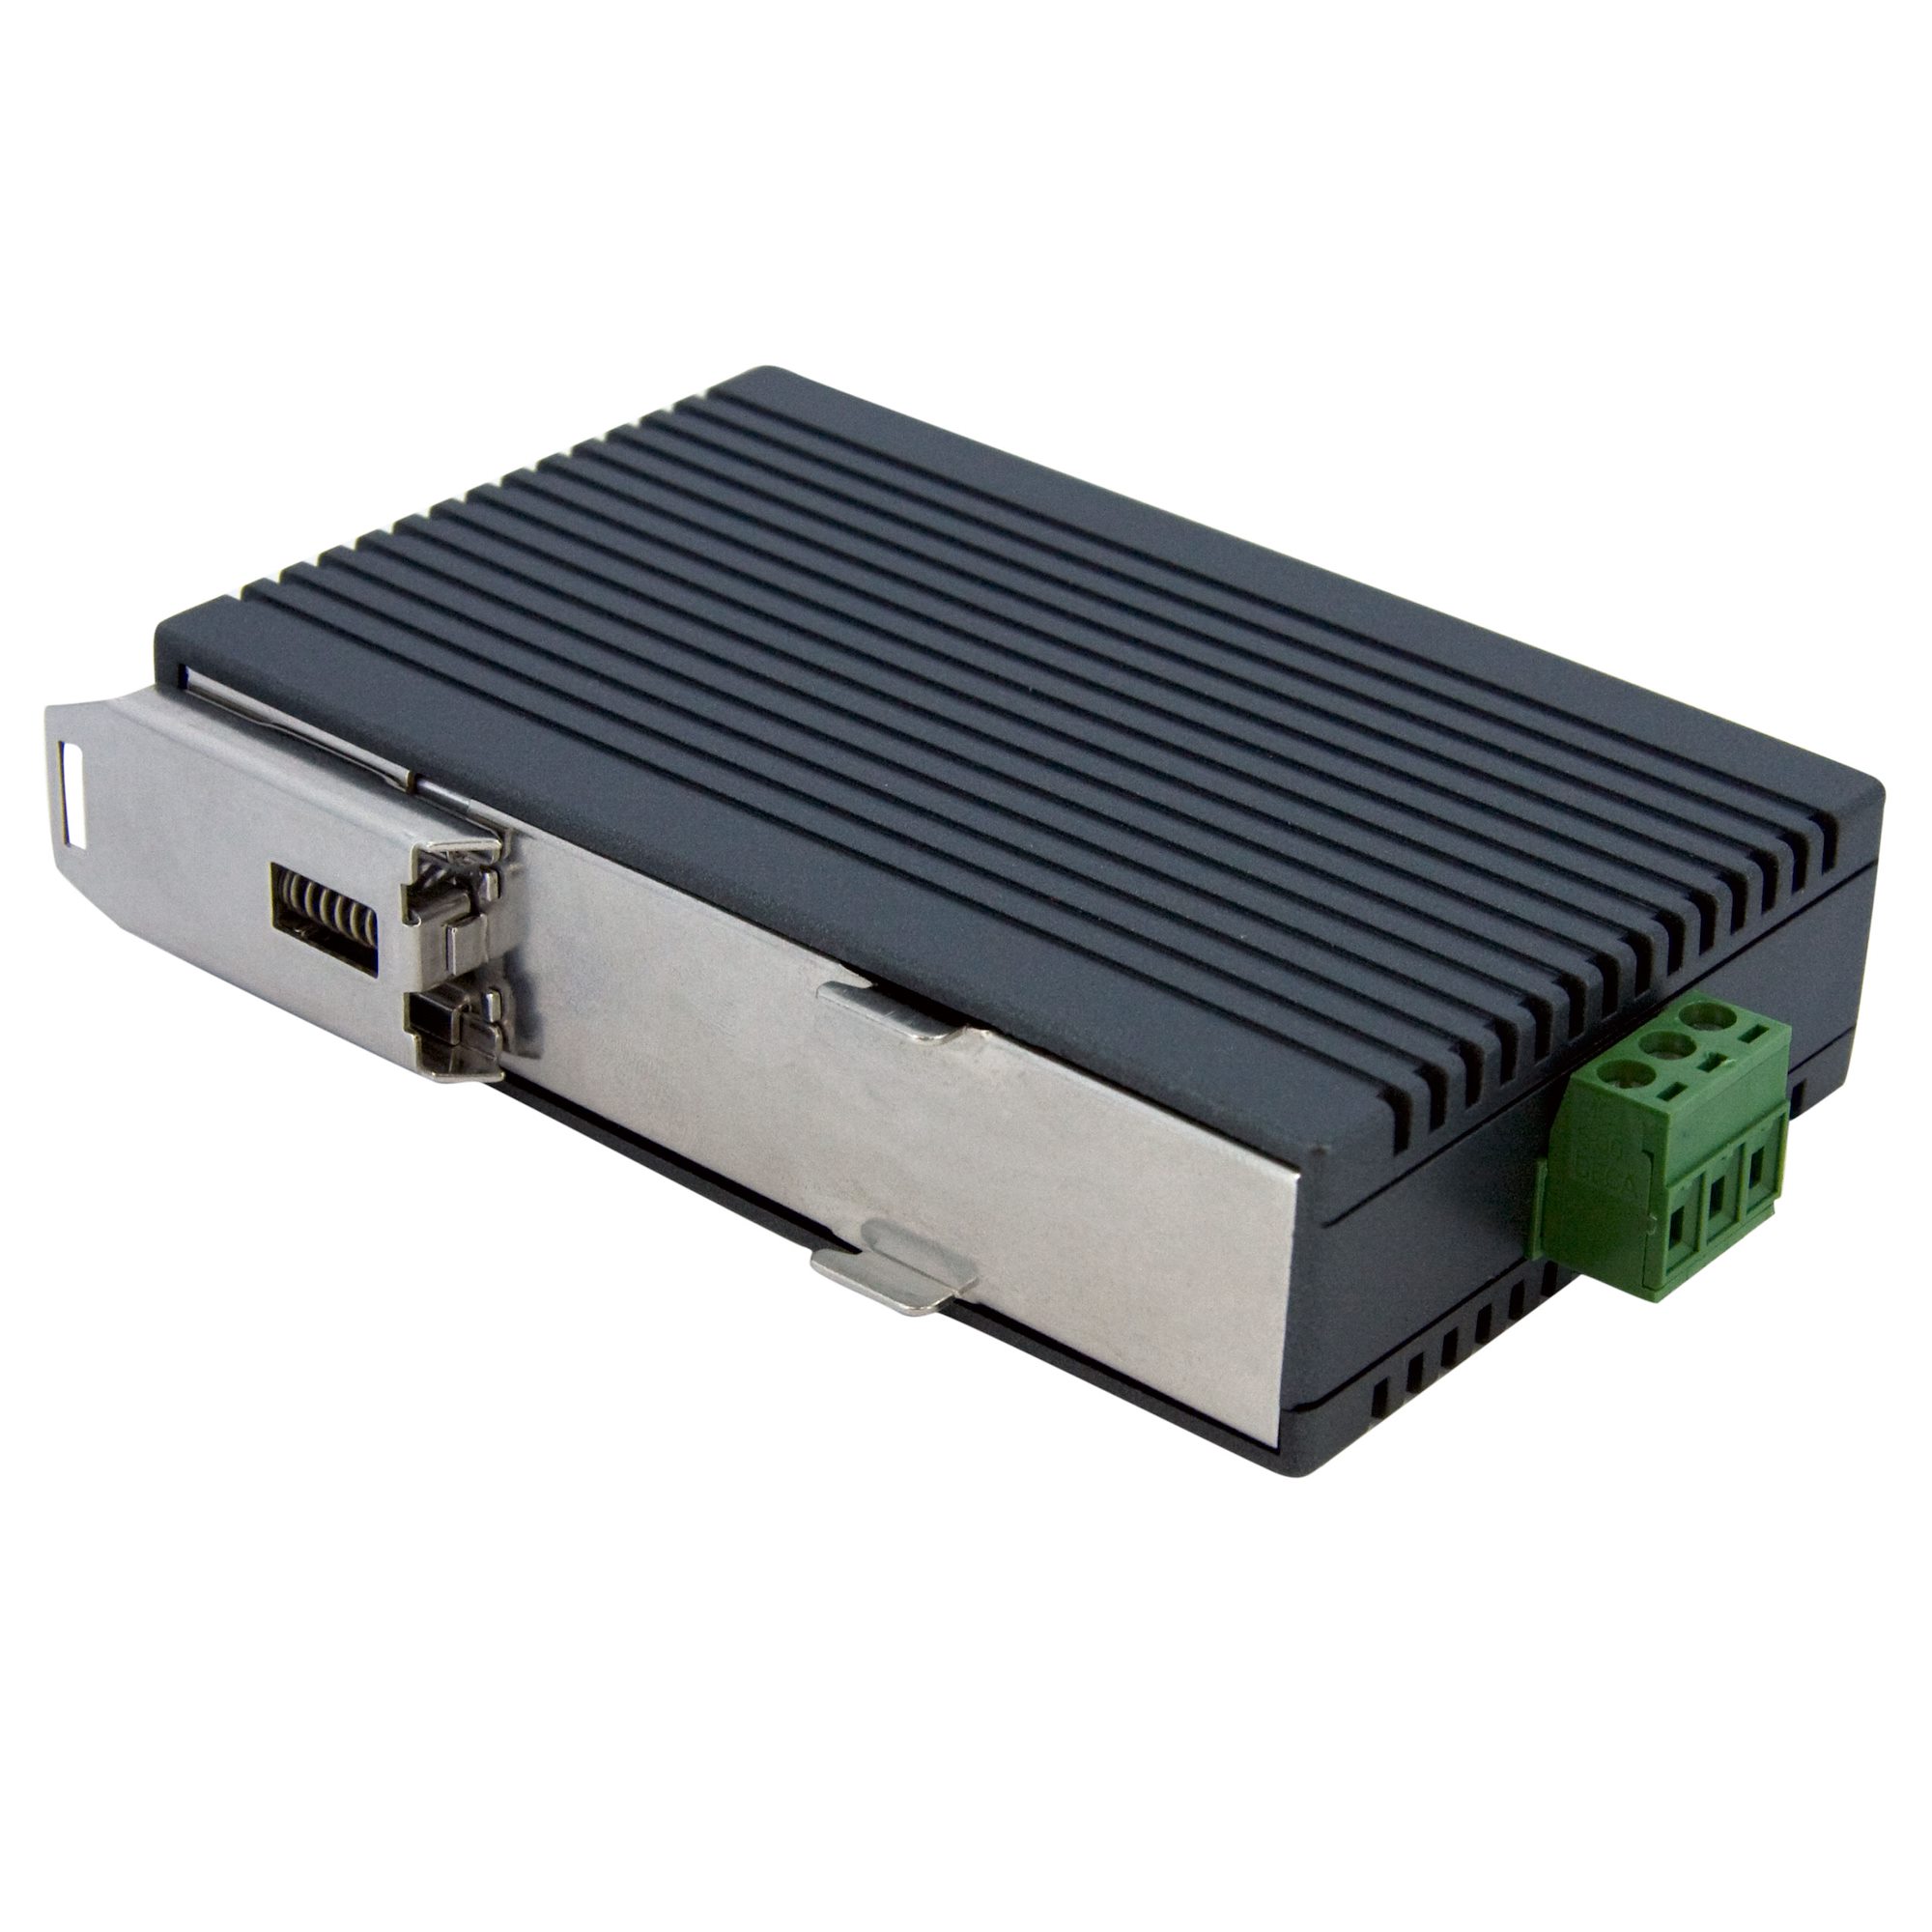 5 Port Industrial 10/100 Ethernet Switch - Ethernet Switches